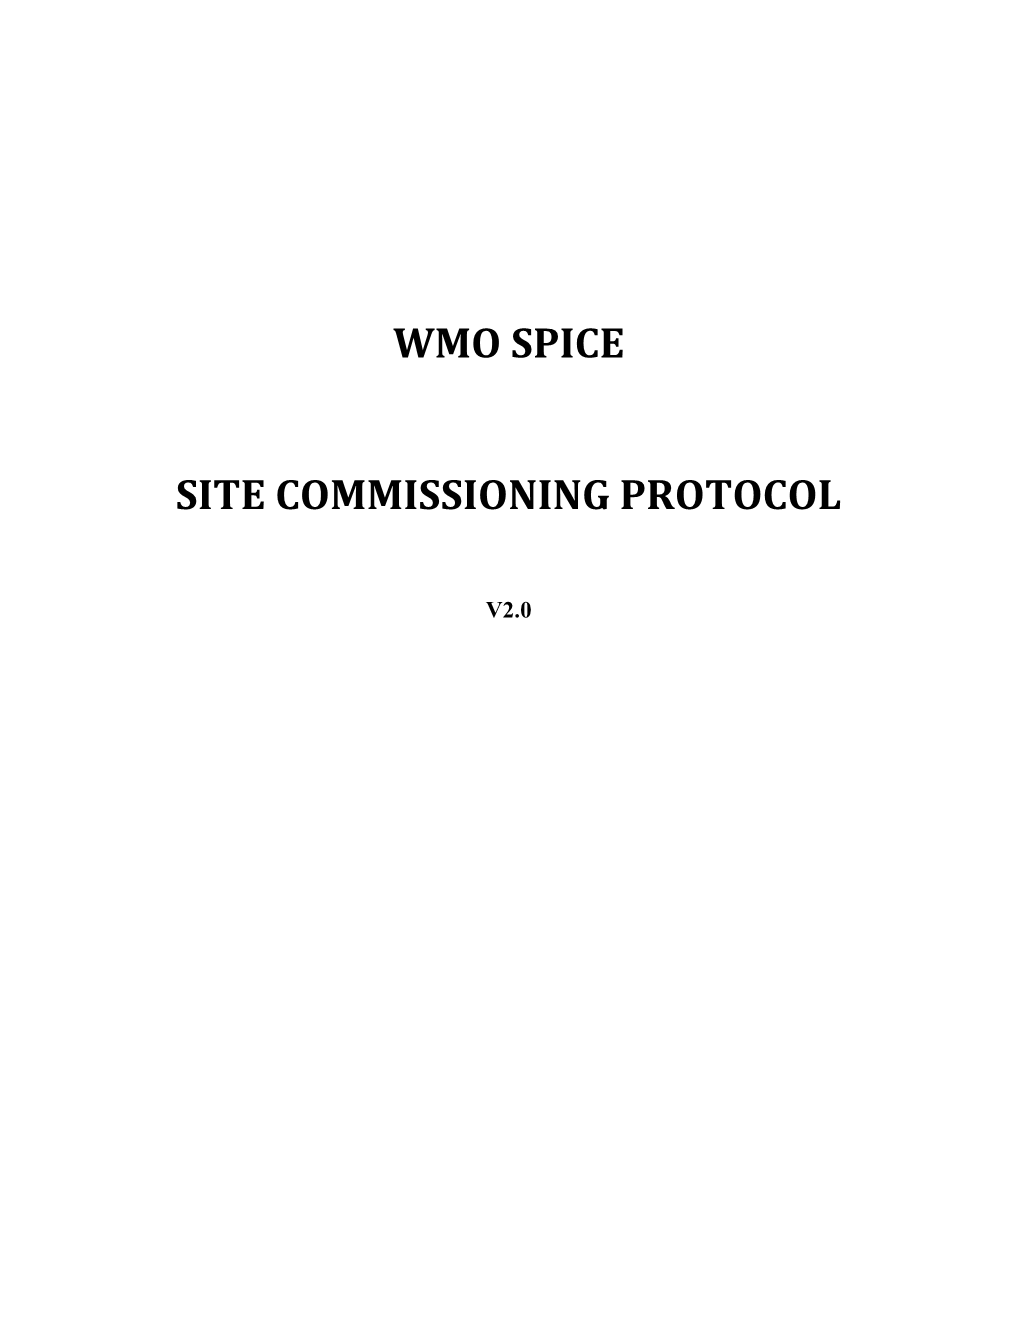 SPICE Commissioning Protocol